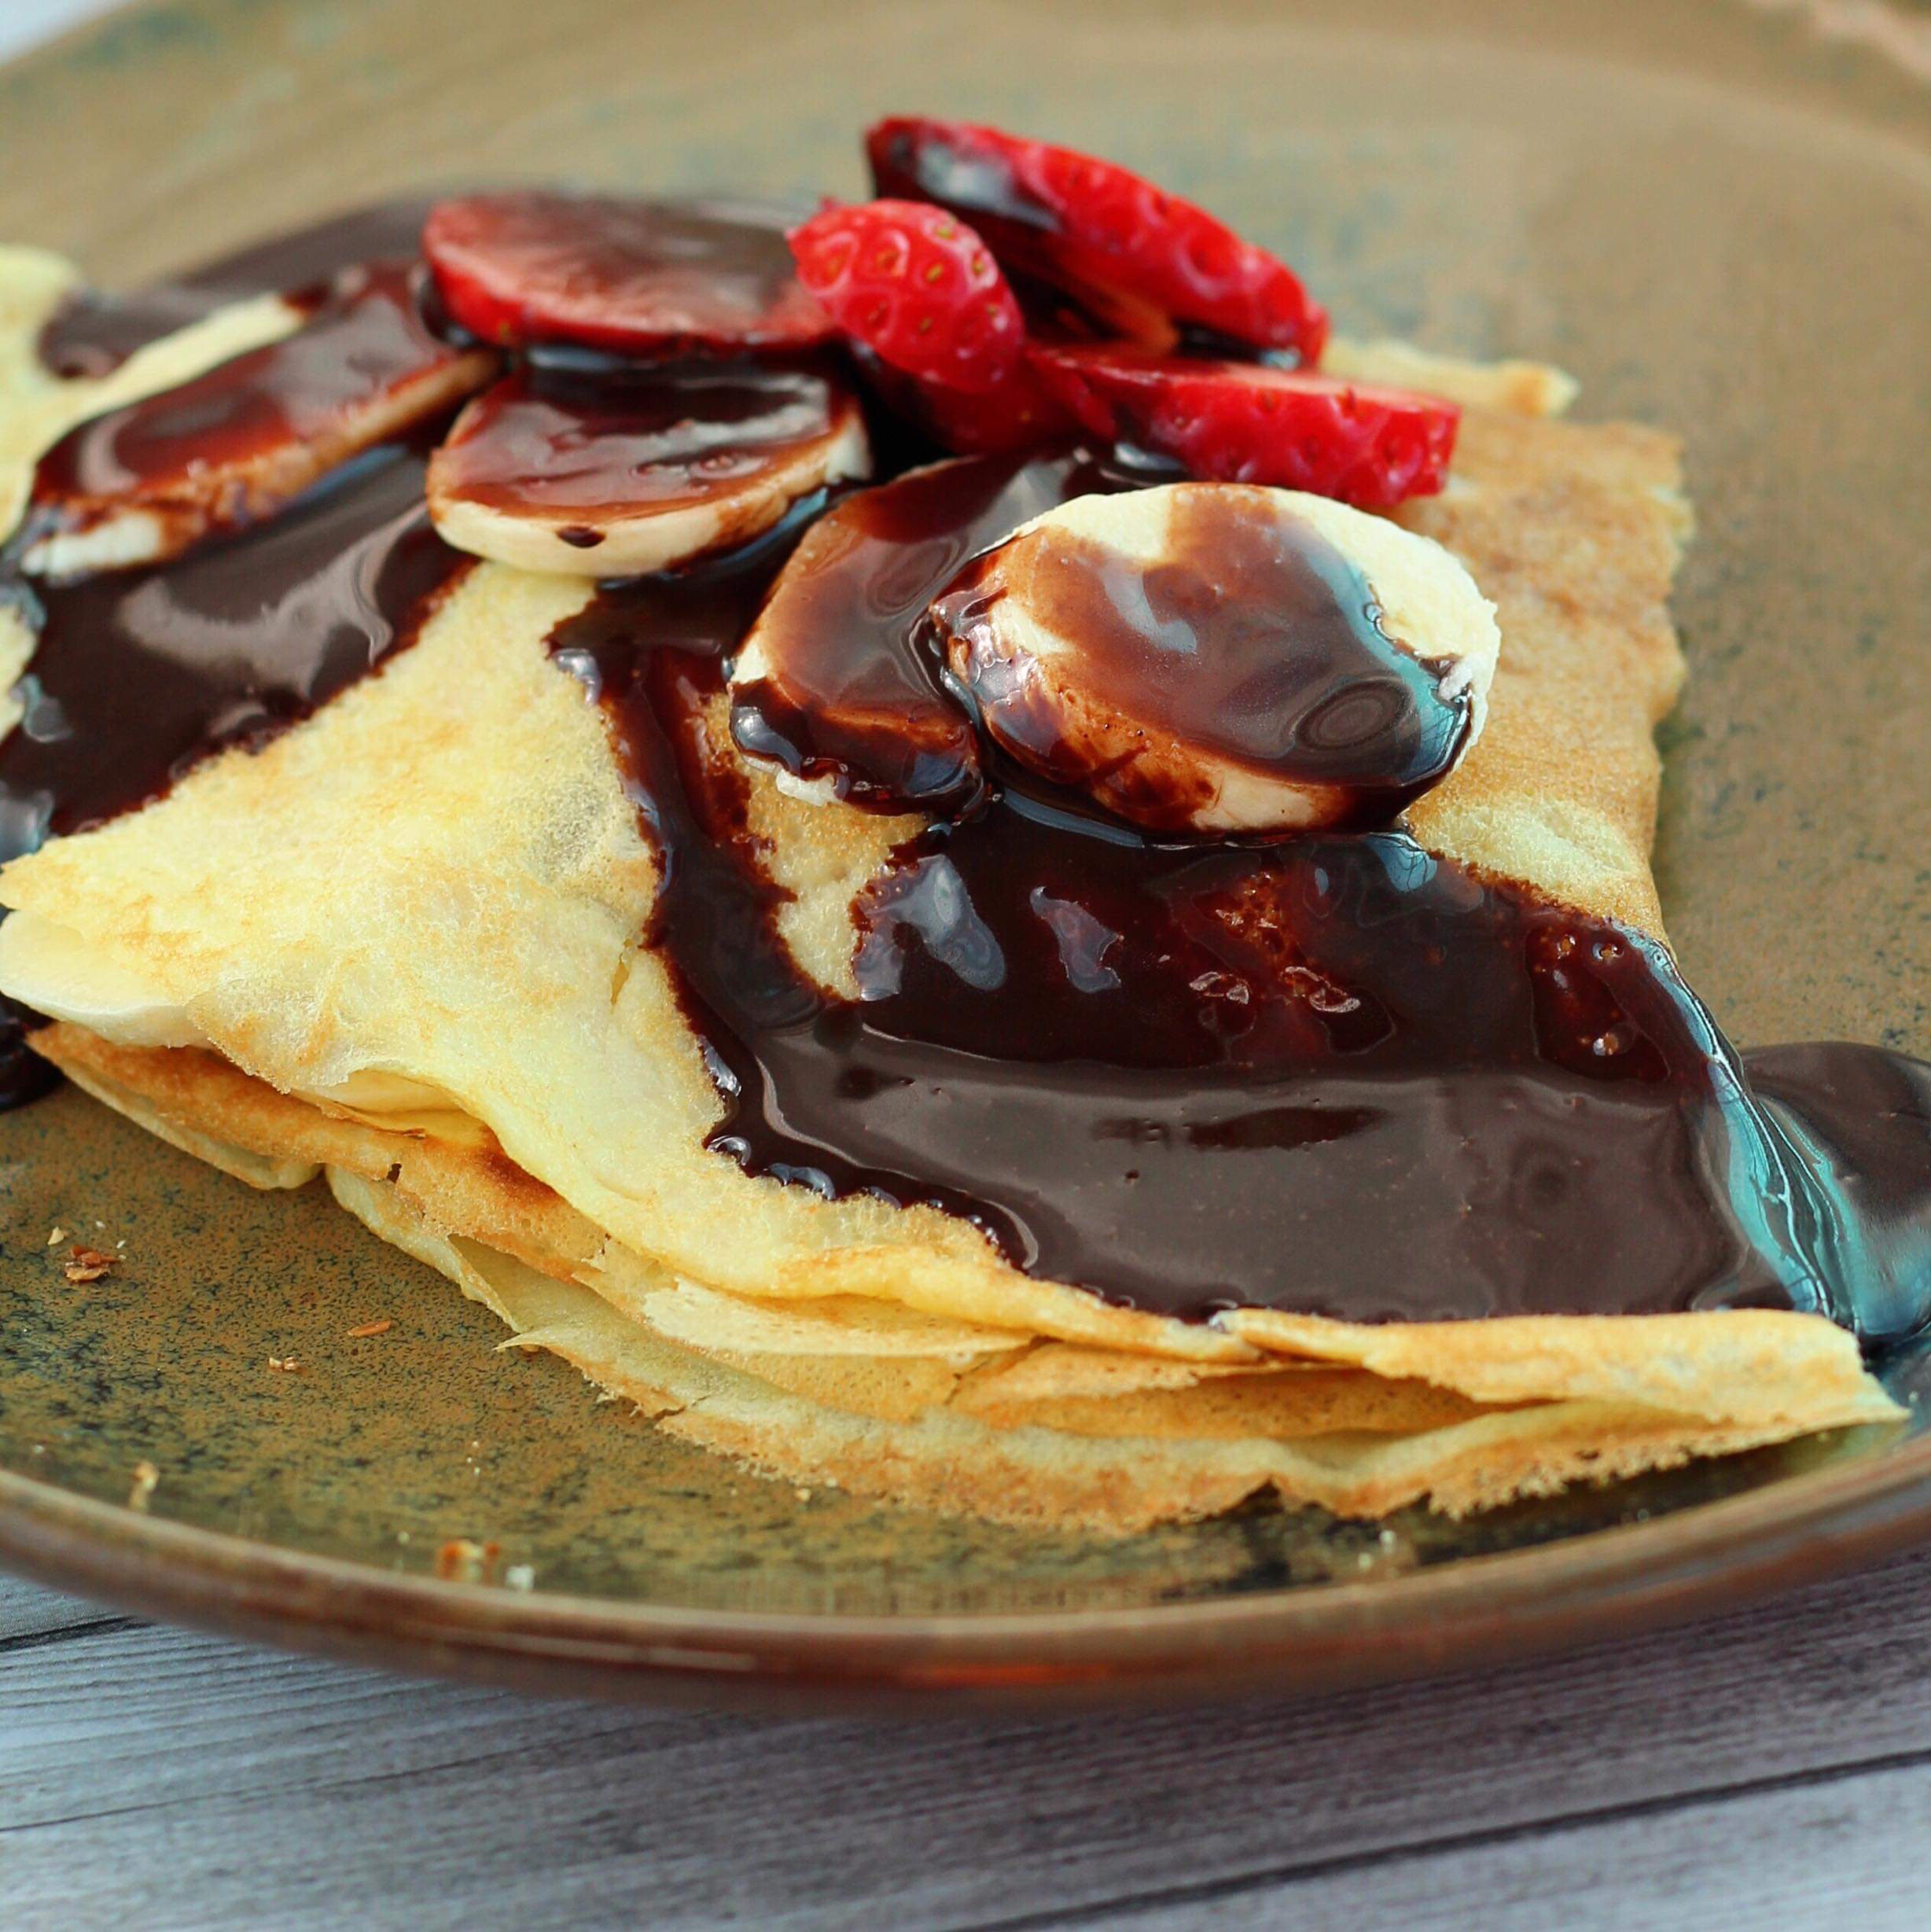 Dessert Crepes with Homemade Chocolate Sauce